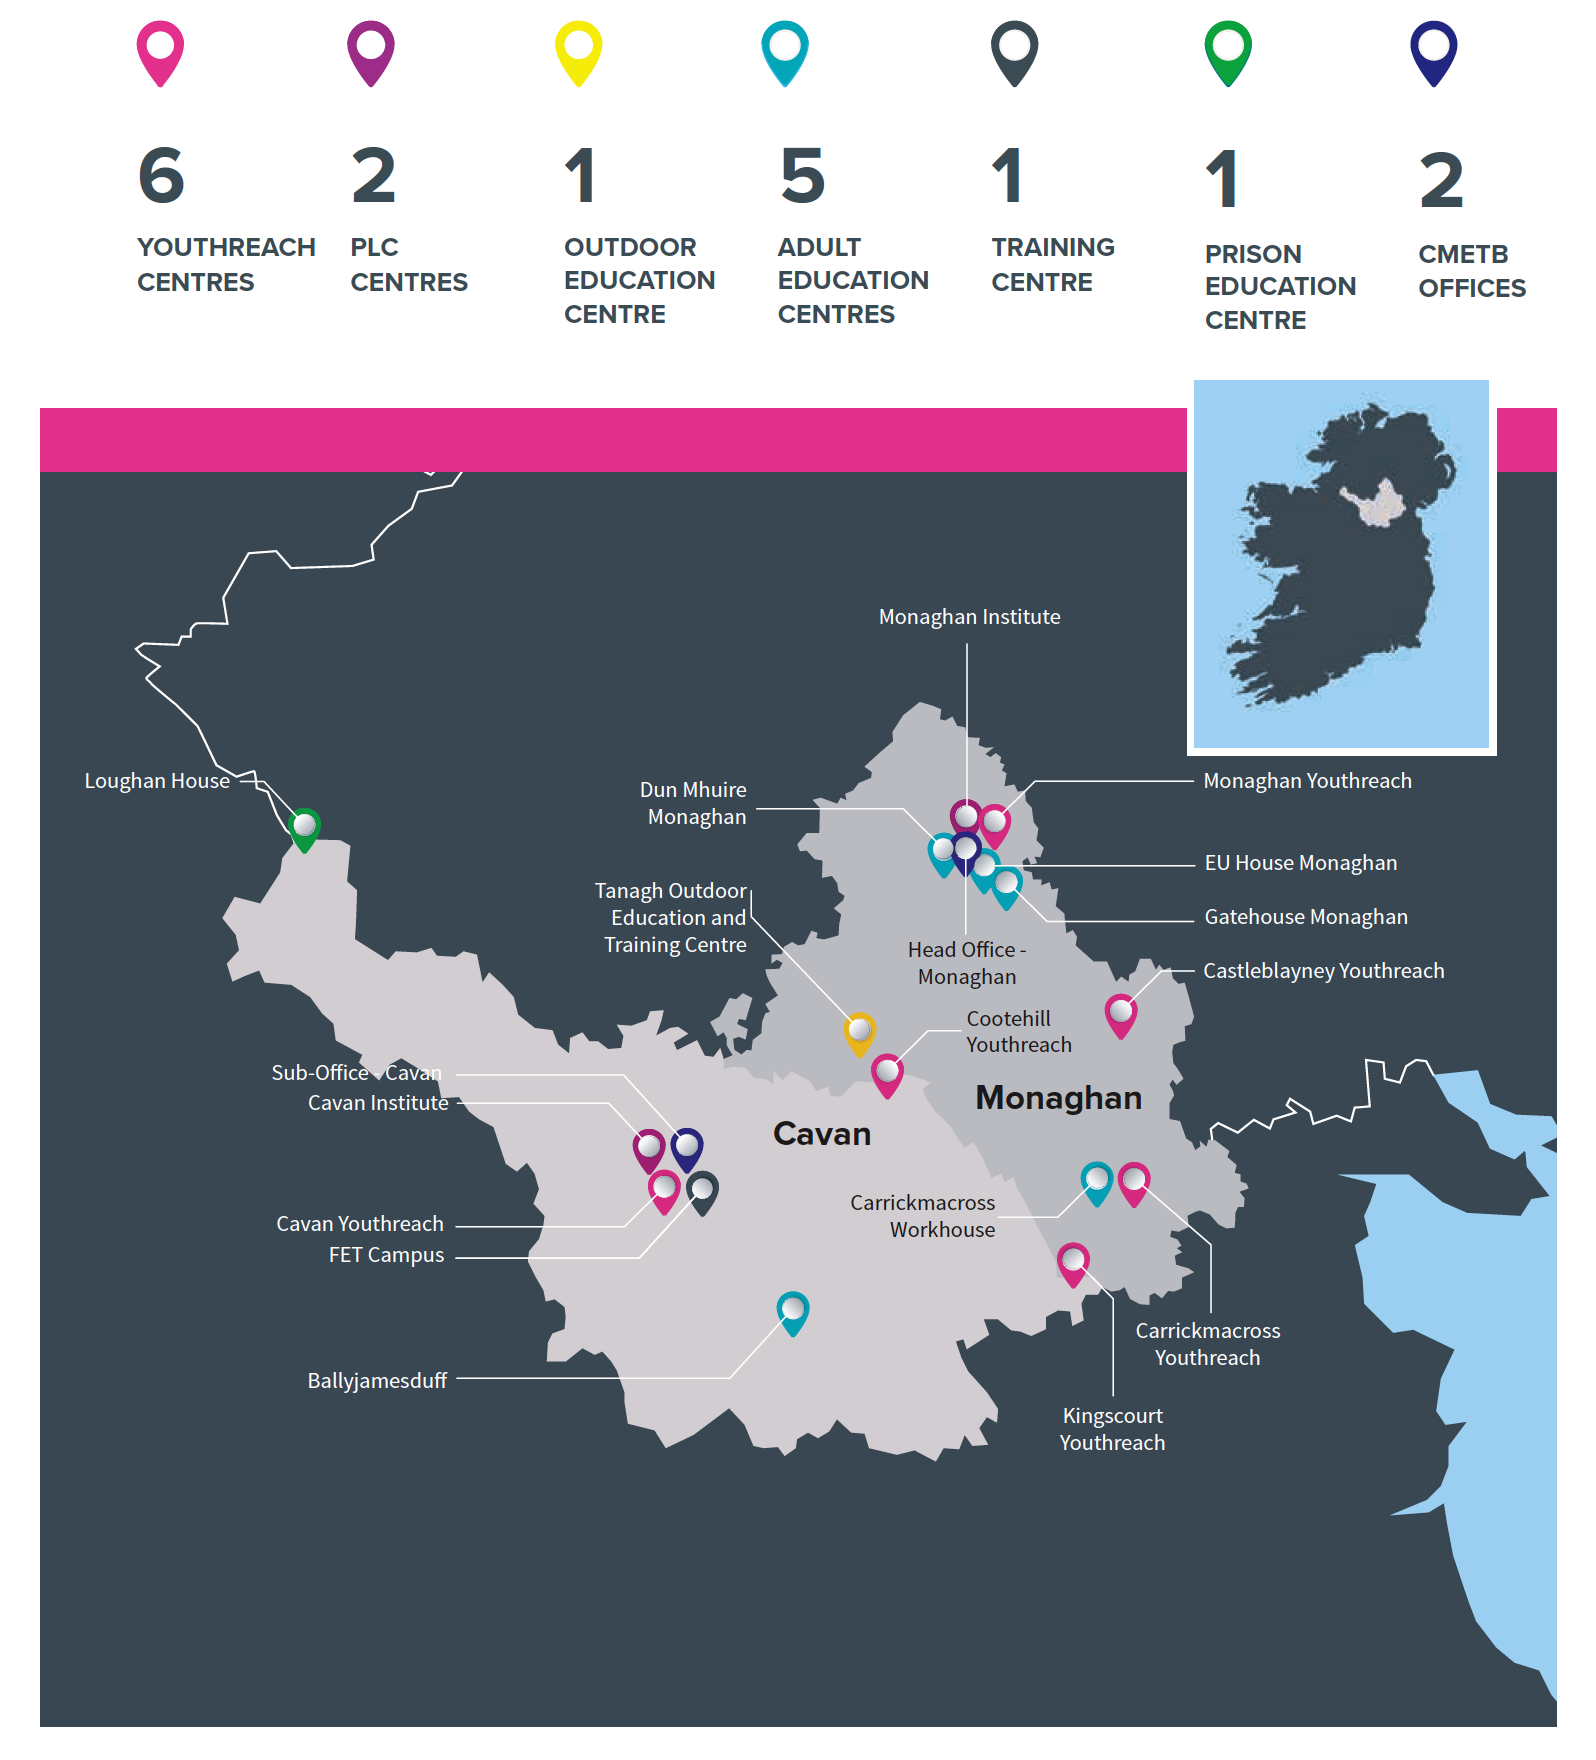 Image of Overview of Service Locations in Cavan and Monaghan